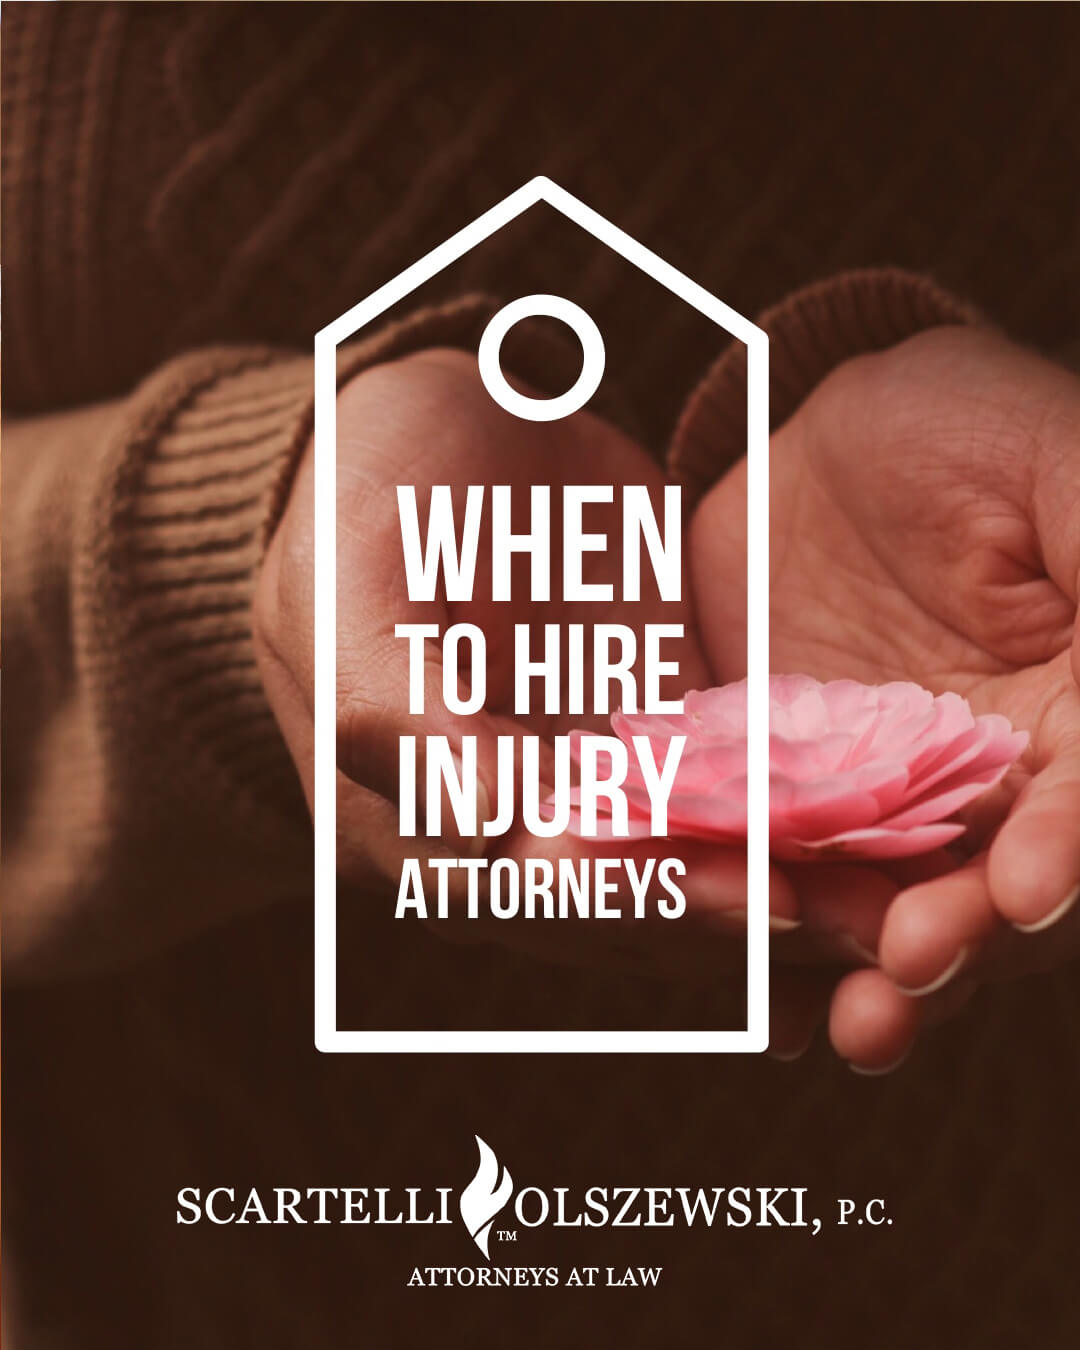 Injury Attorney: When Should You Call?